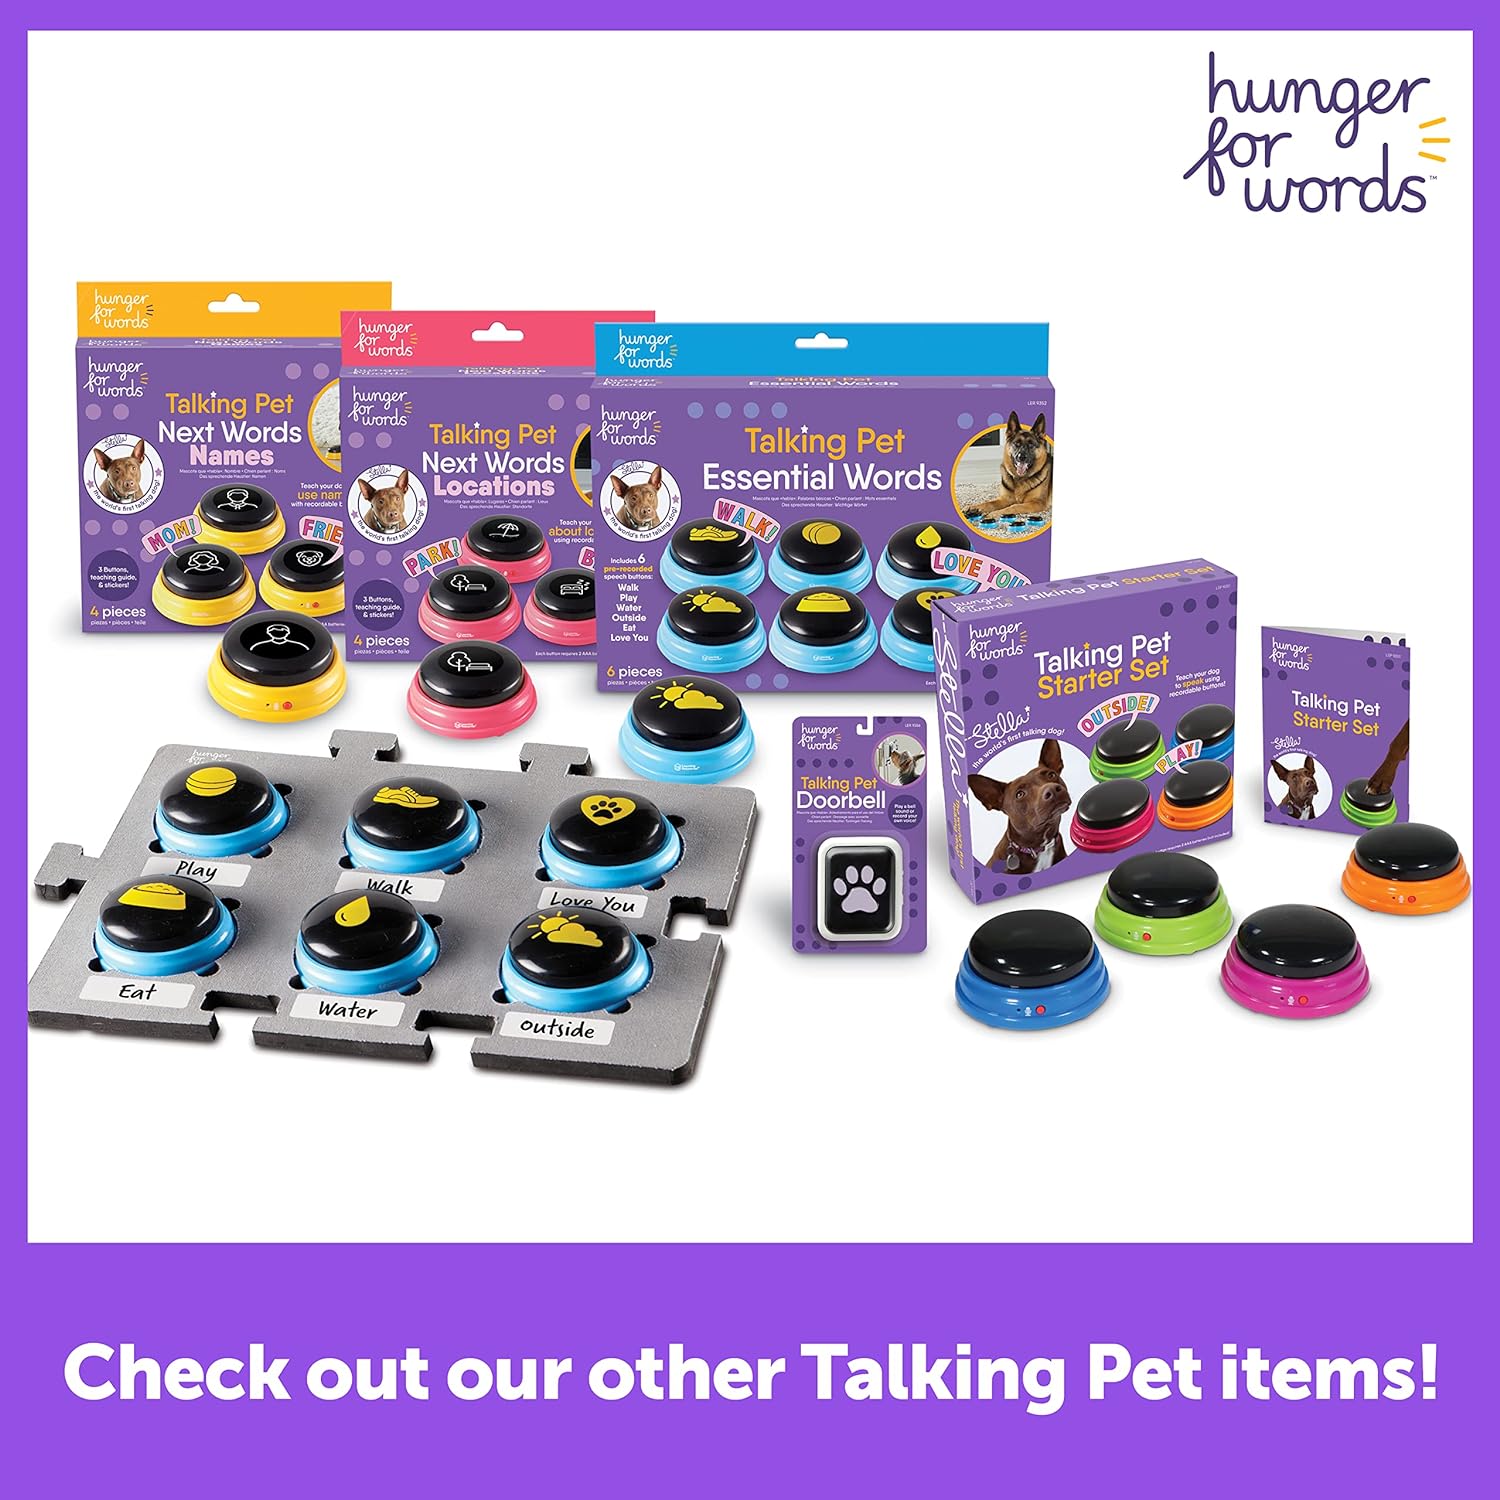 Hunger for Words Talking Pet Essential Words Button Set (6-Pieces)